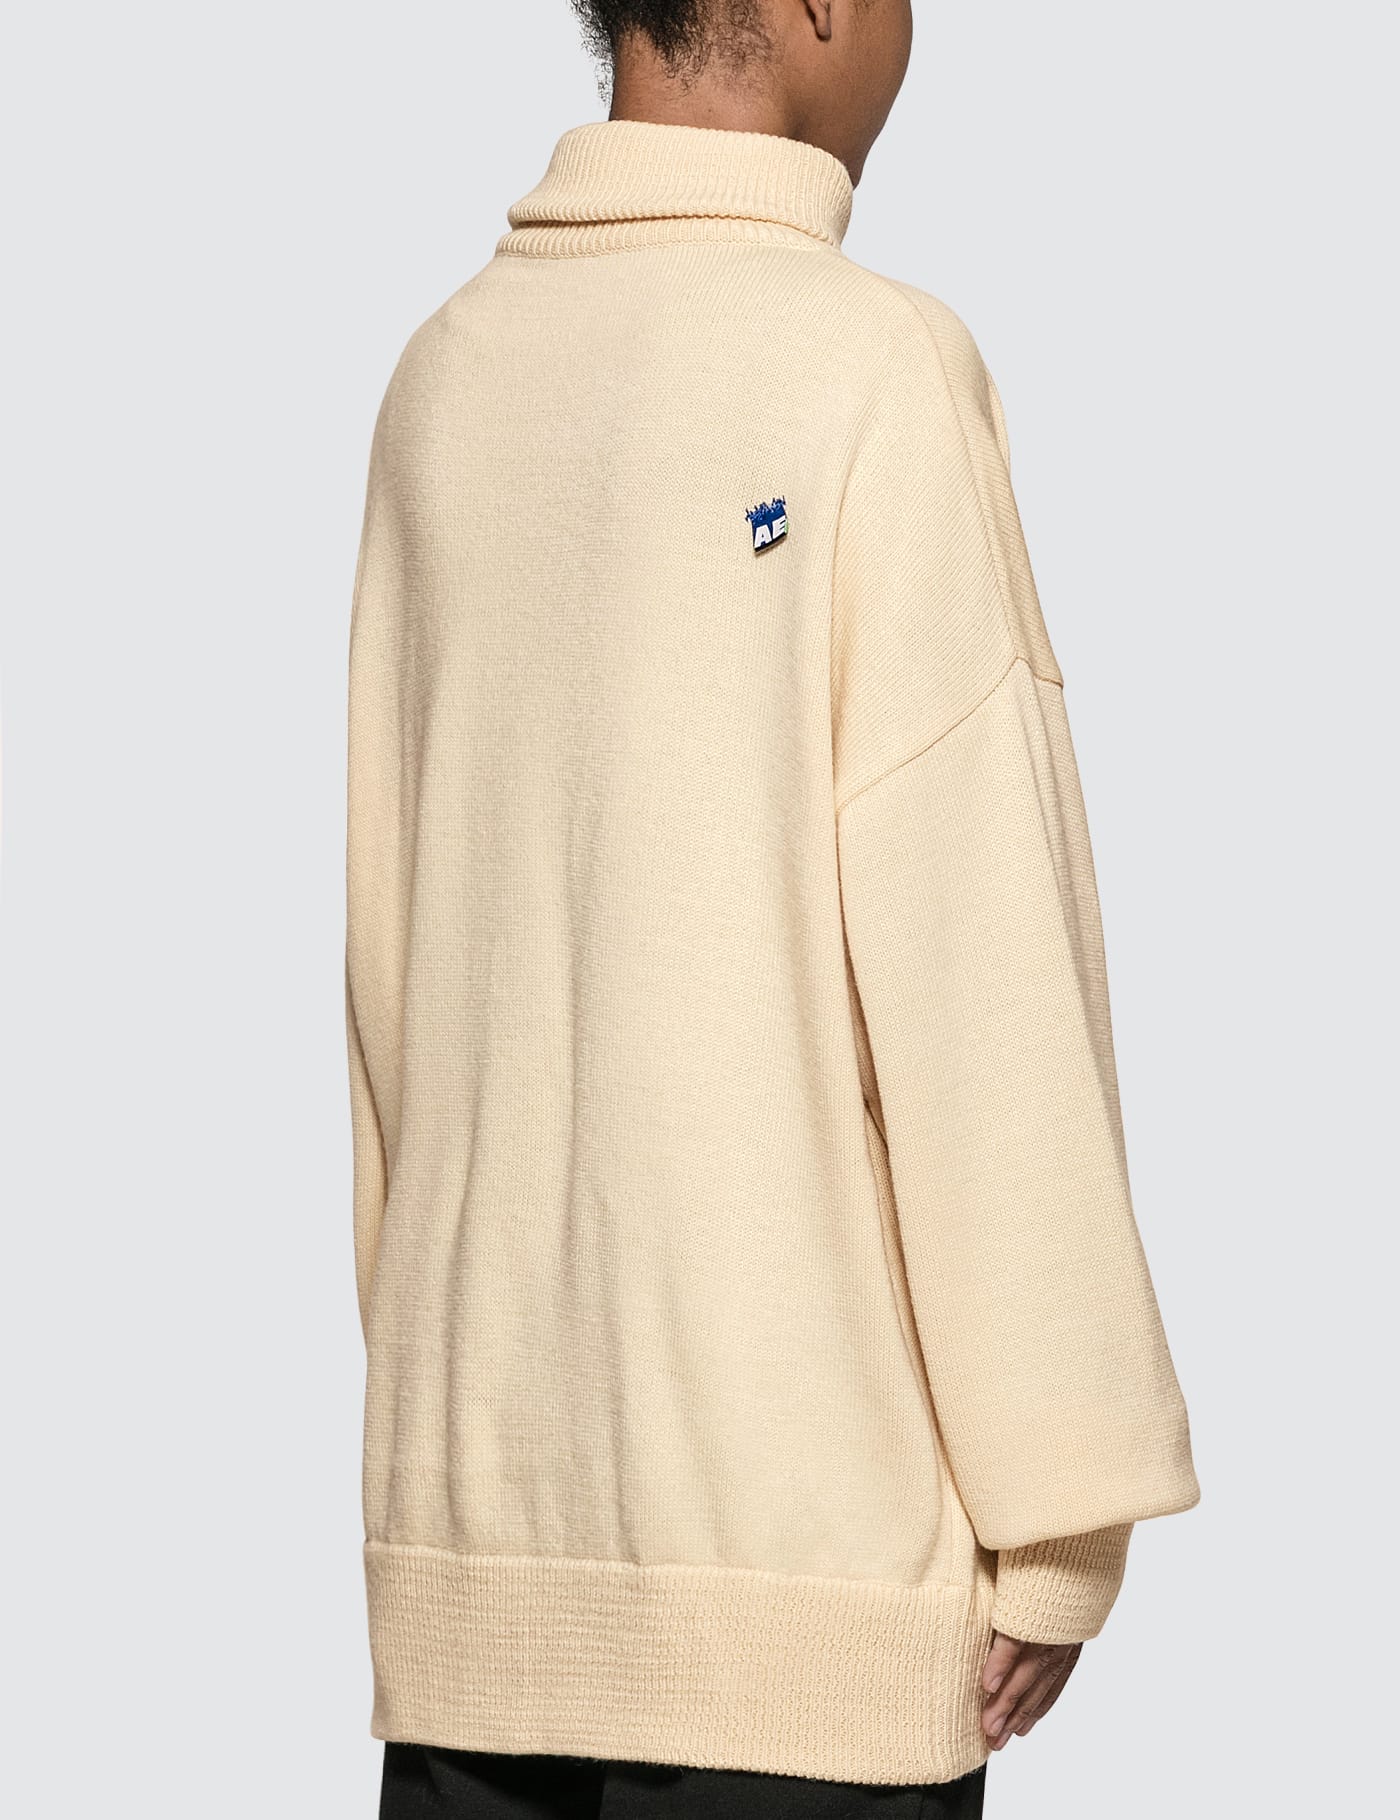 Ader Error - Adererror Company Knitted Jumper | HBX - Globally Curated  Fashion and Lifestyle by Hypebeast